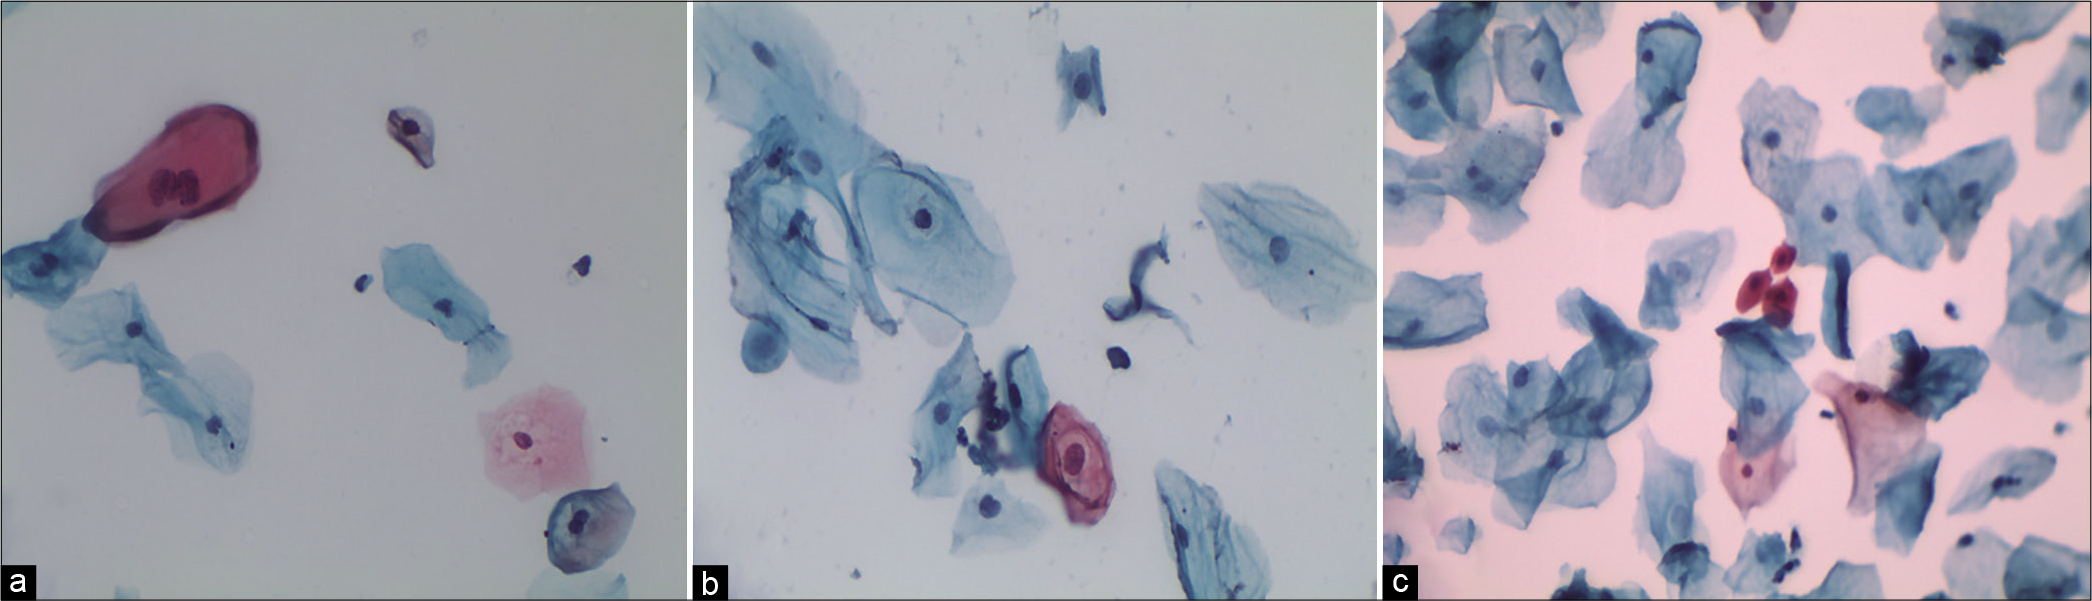 LBC (a) Smear showing dyskeratotic cell with binucleation. (b) Single dyskeratotic cell with partial haloing of cytoplasm. (c) Dyskeratotic cells with dense pyknotic nuclei (×40).